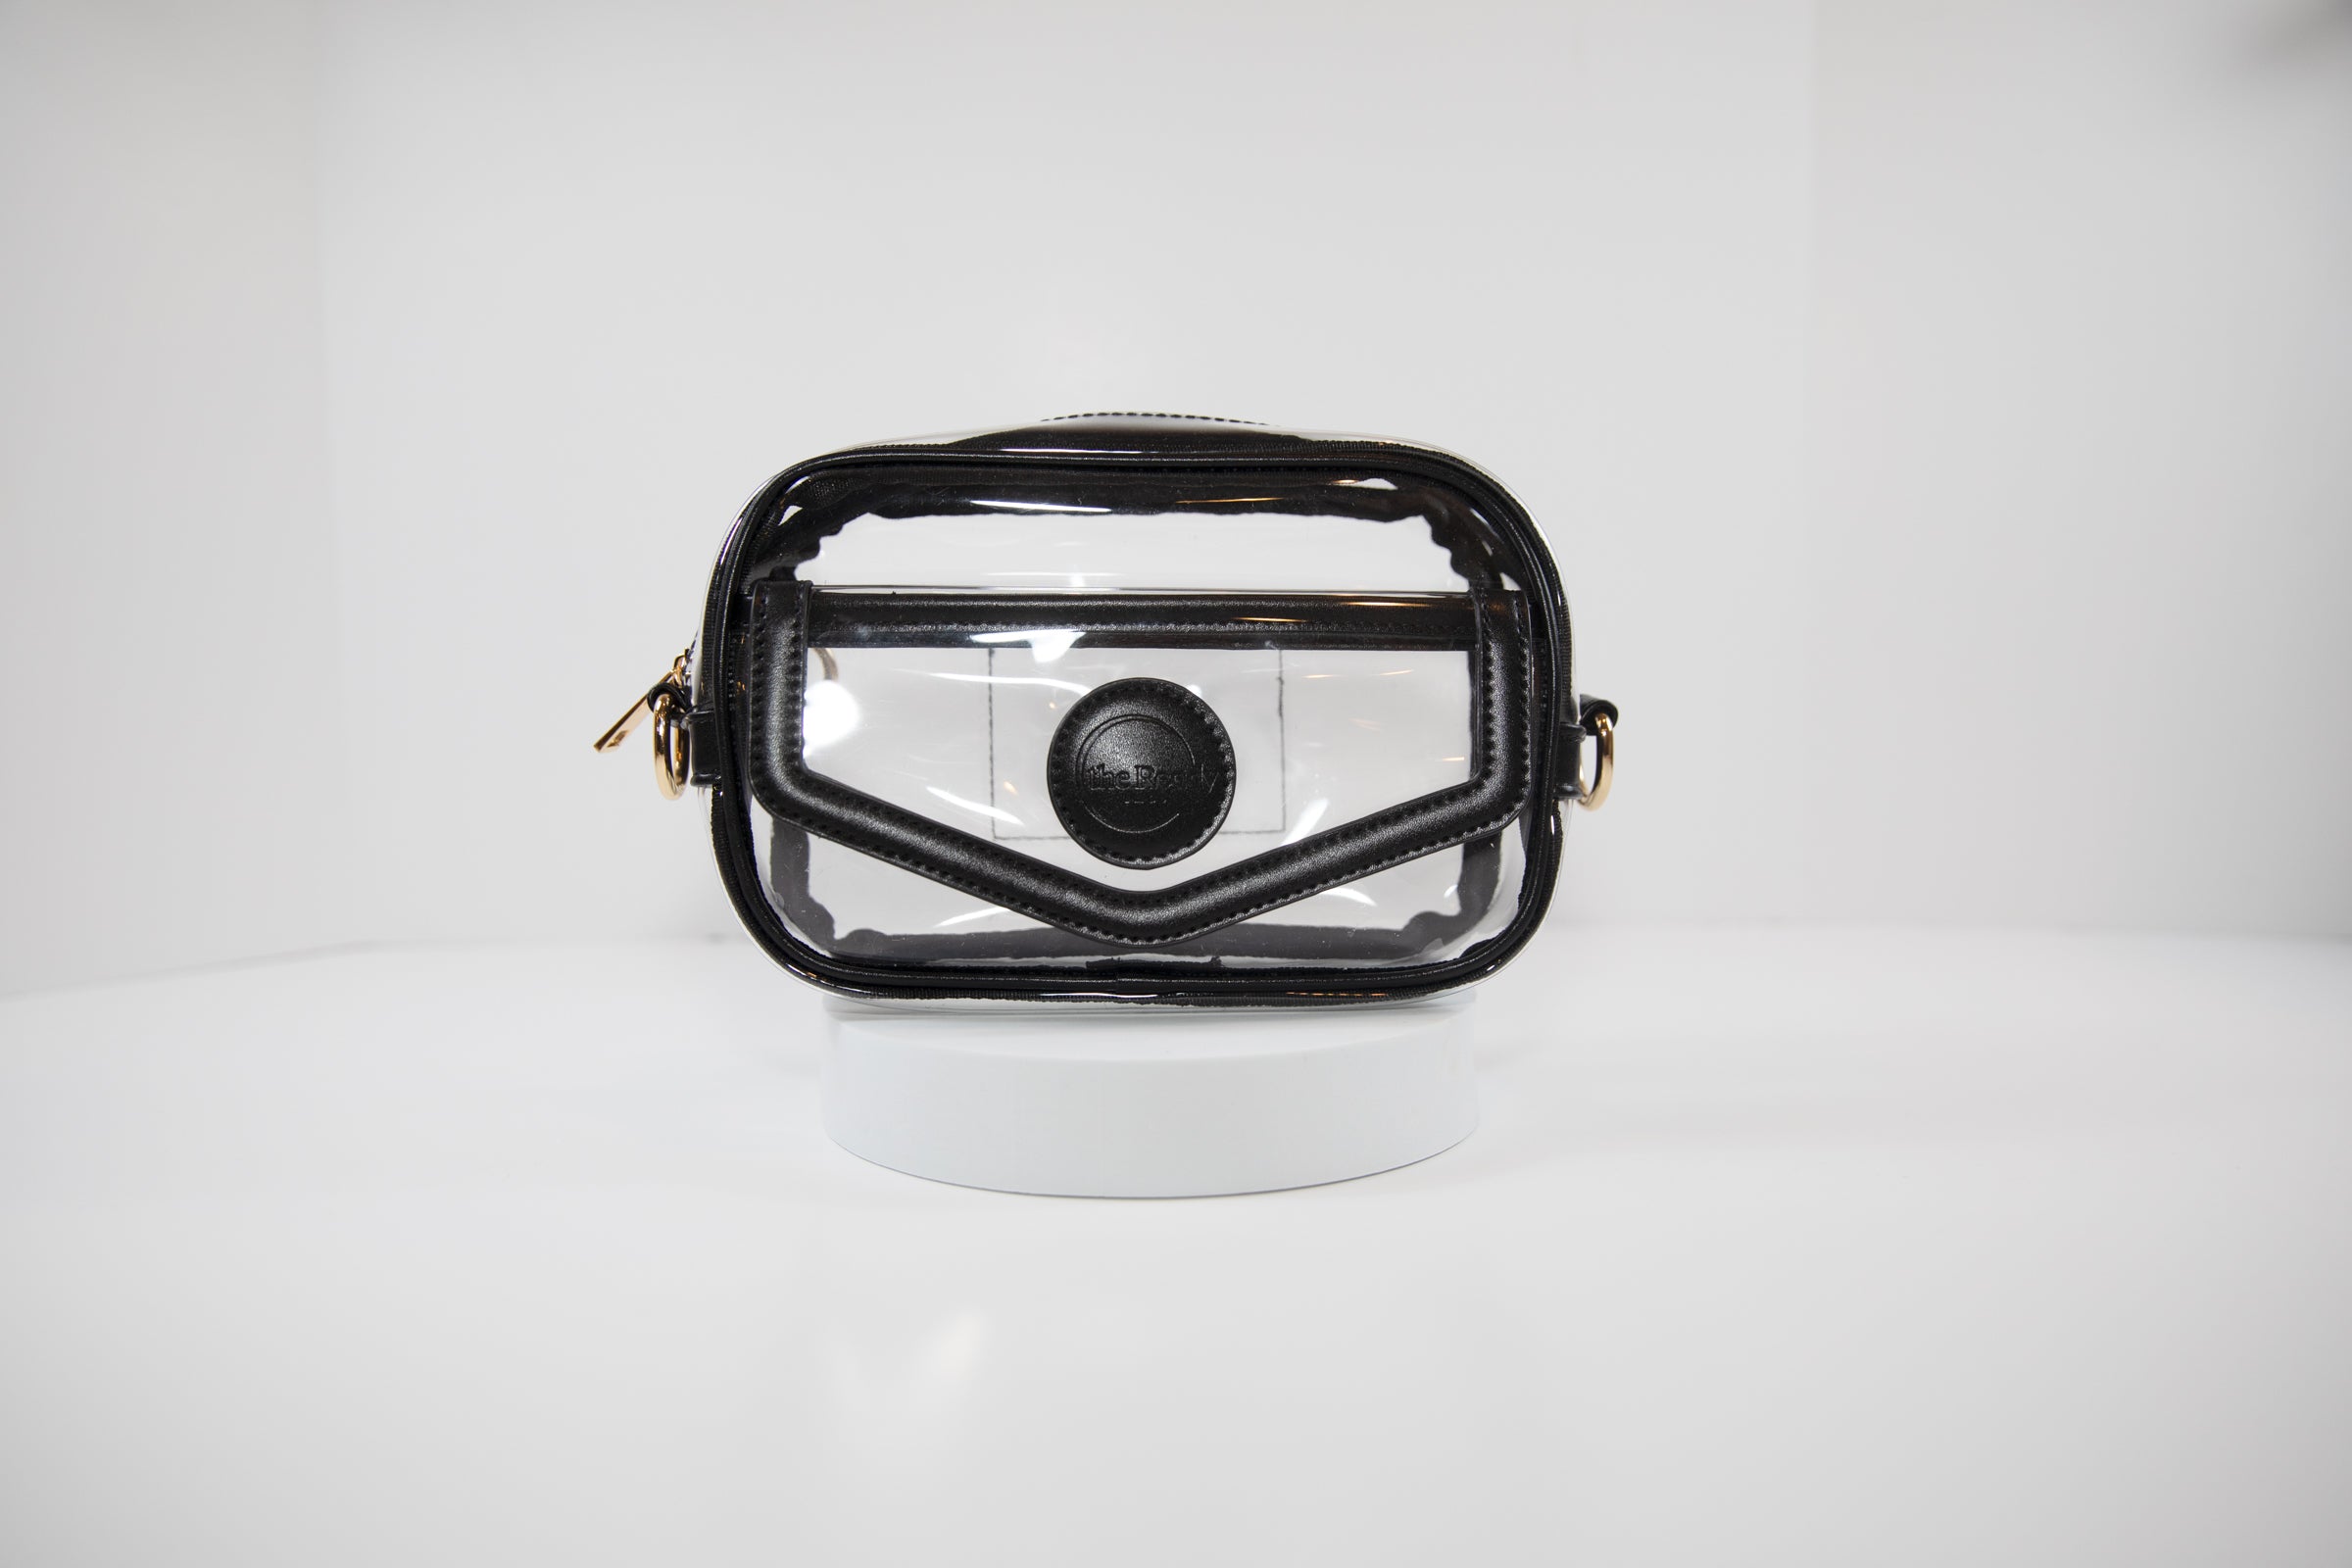 Clear stadium bag with gold hardware, front facing, that can be worn as a crossbody or a belt bag.